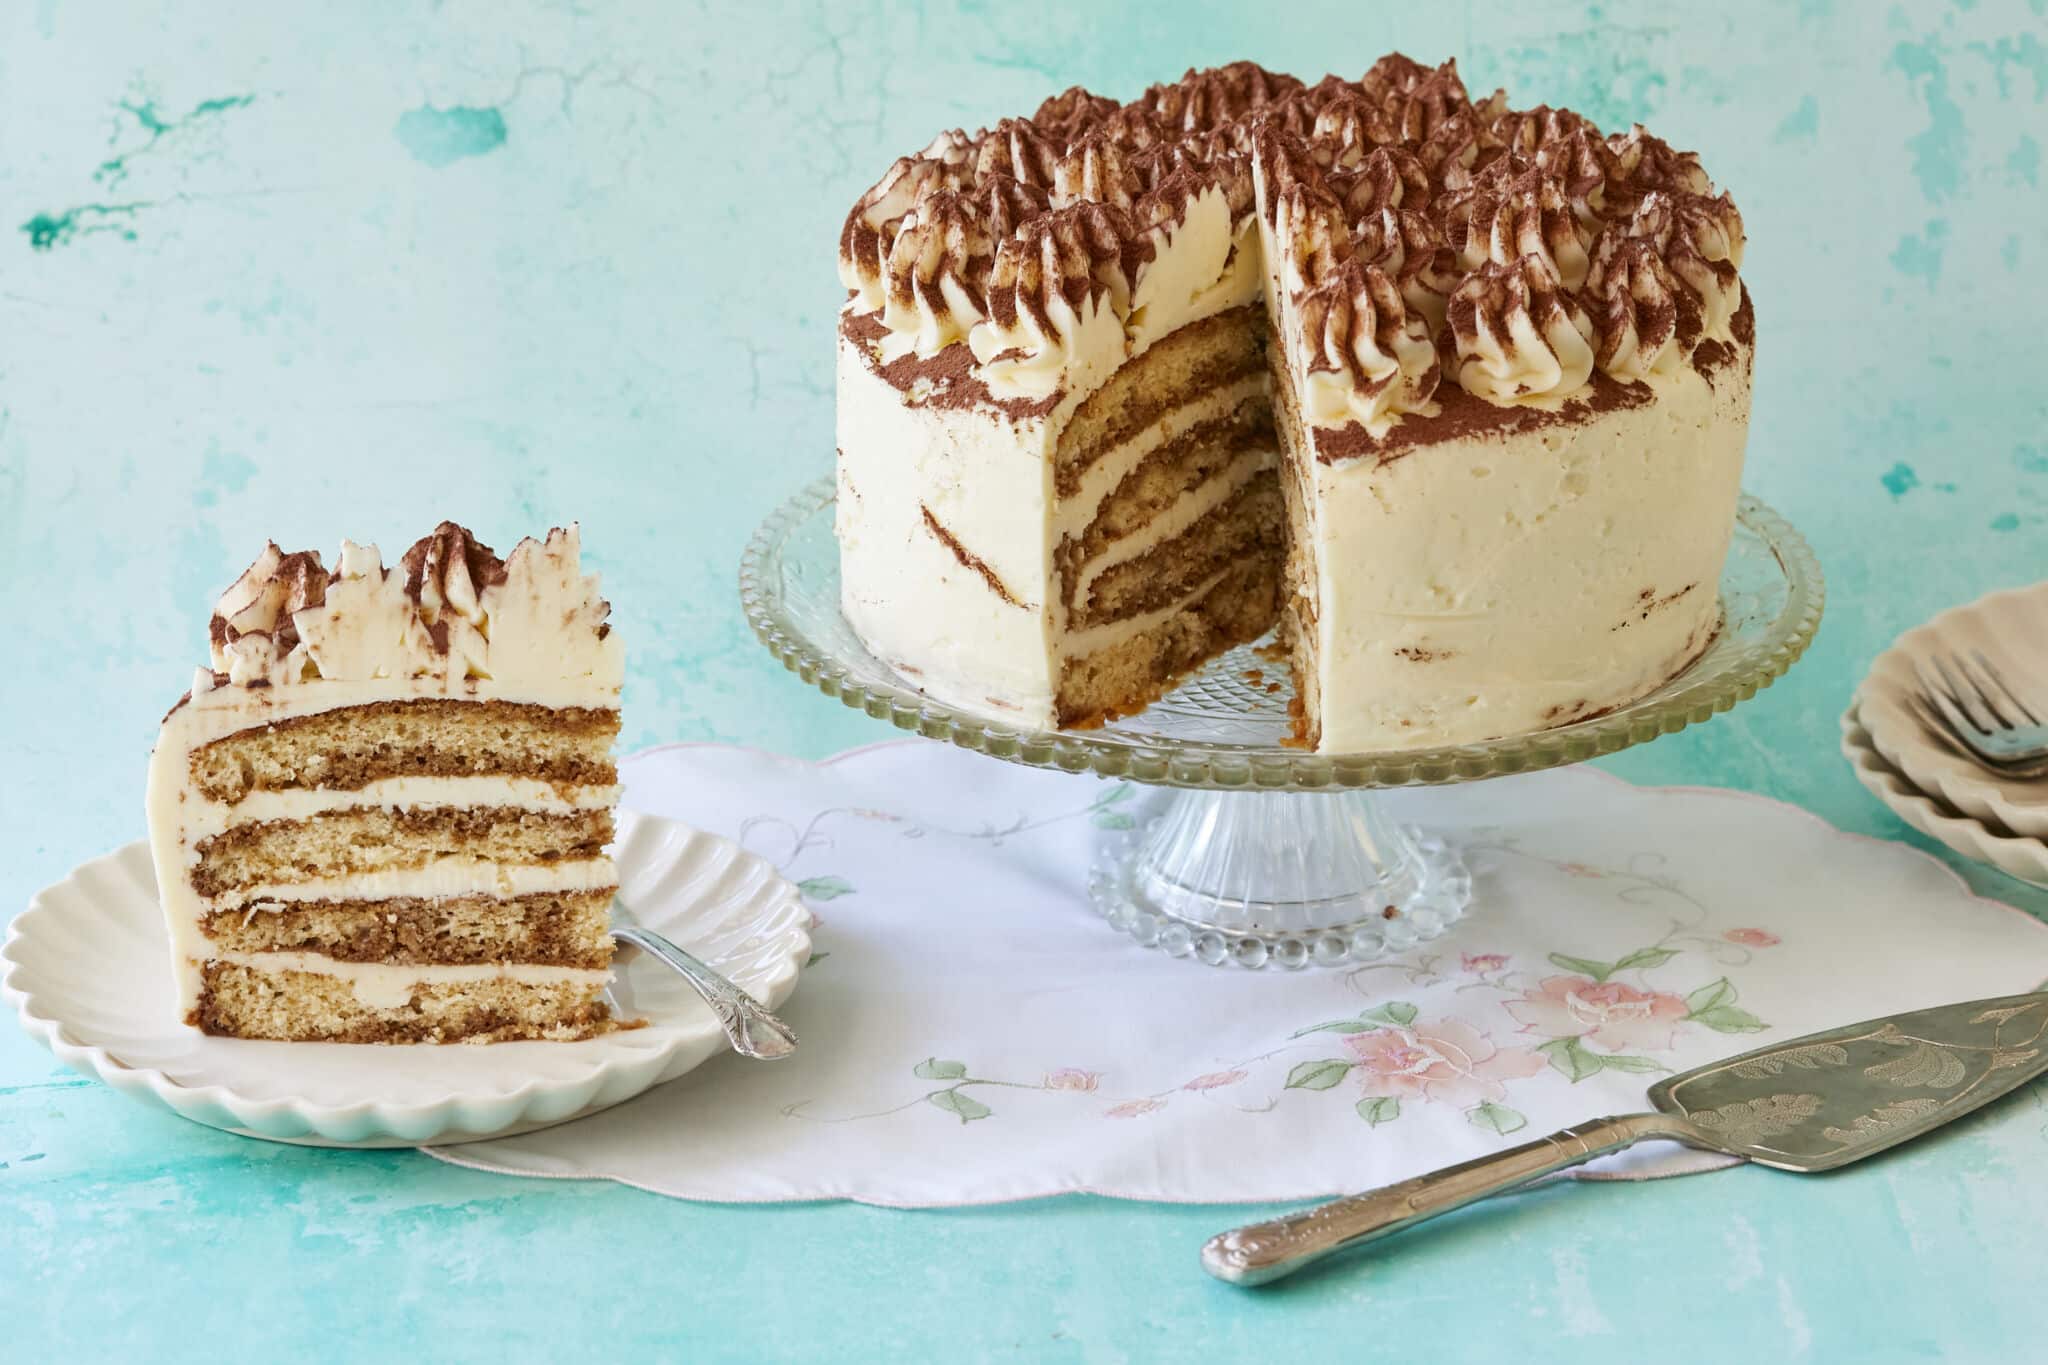 A Stunning Tiramisu Cake is being displayed on a glass cake stand with one generous slice has been cut off. The inside shows its layers of coffee-soaked sponge cake filled with creamy mascarpone. This layered tiramisu cake is topped with rosettes and dusted cocoa which makes it visually appealing.